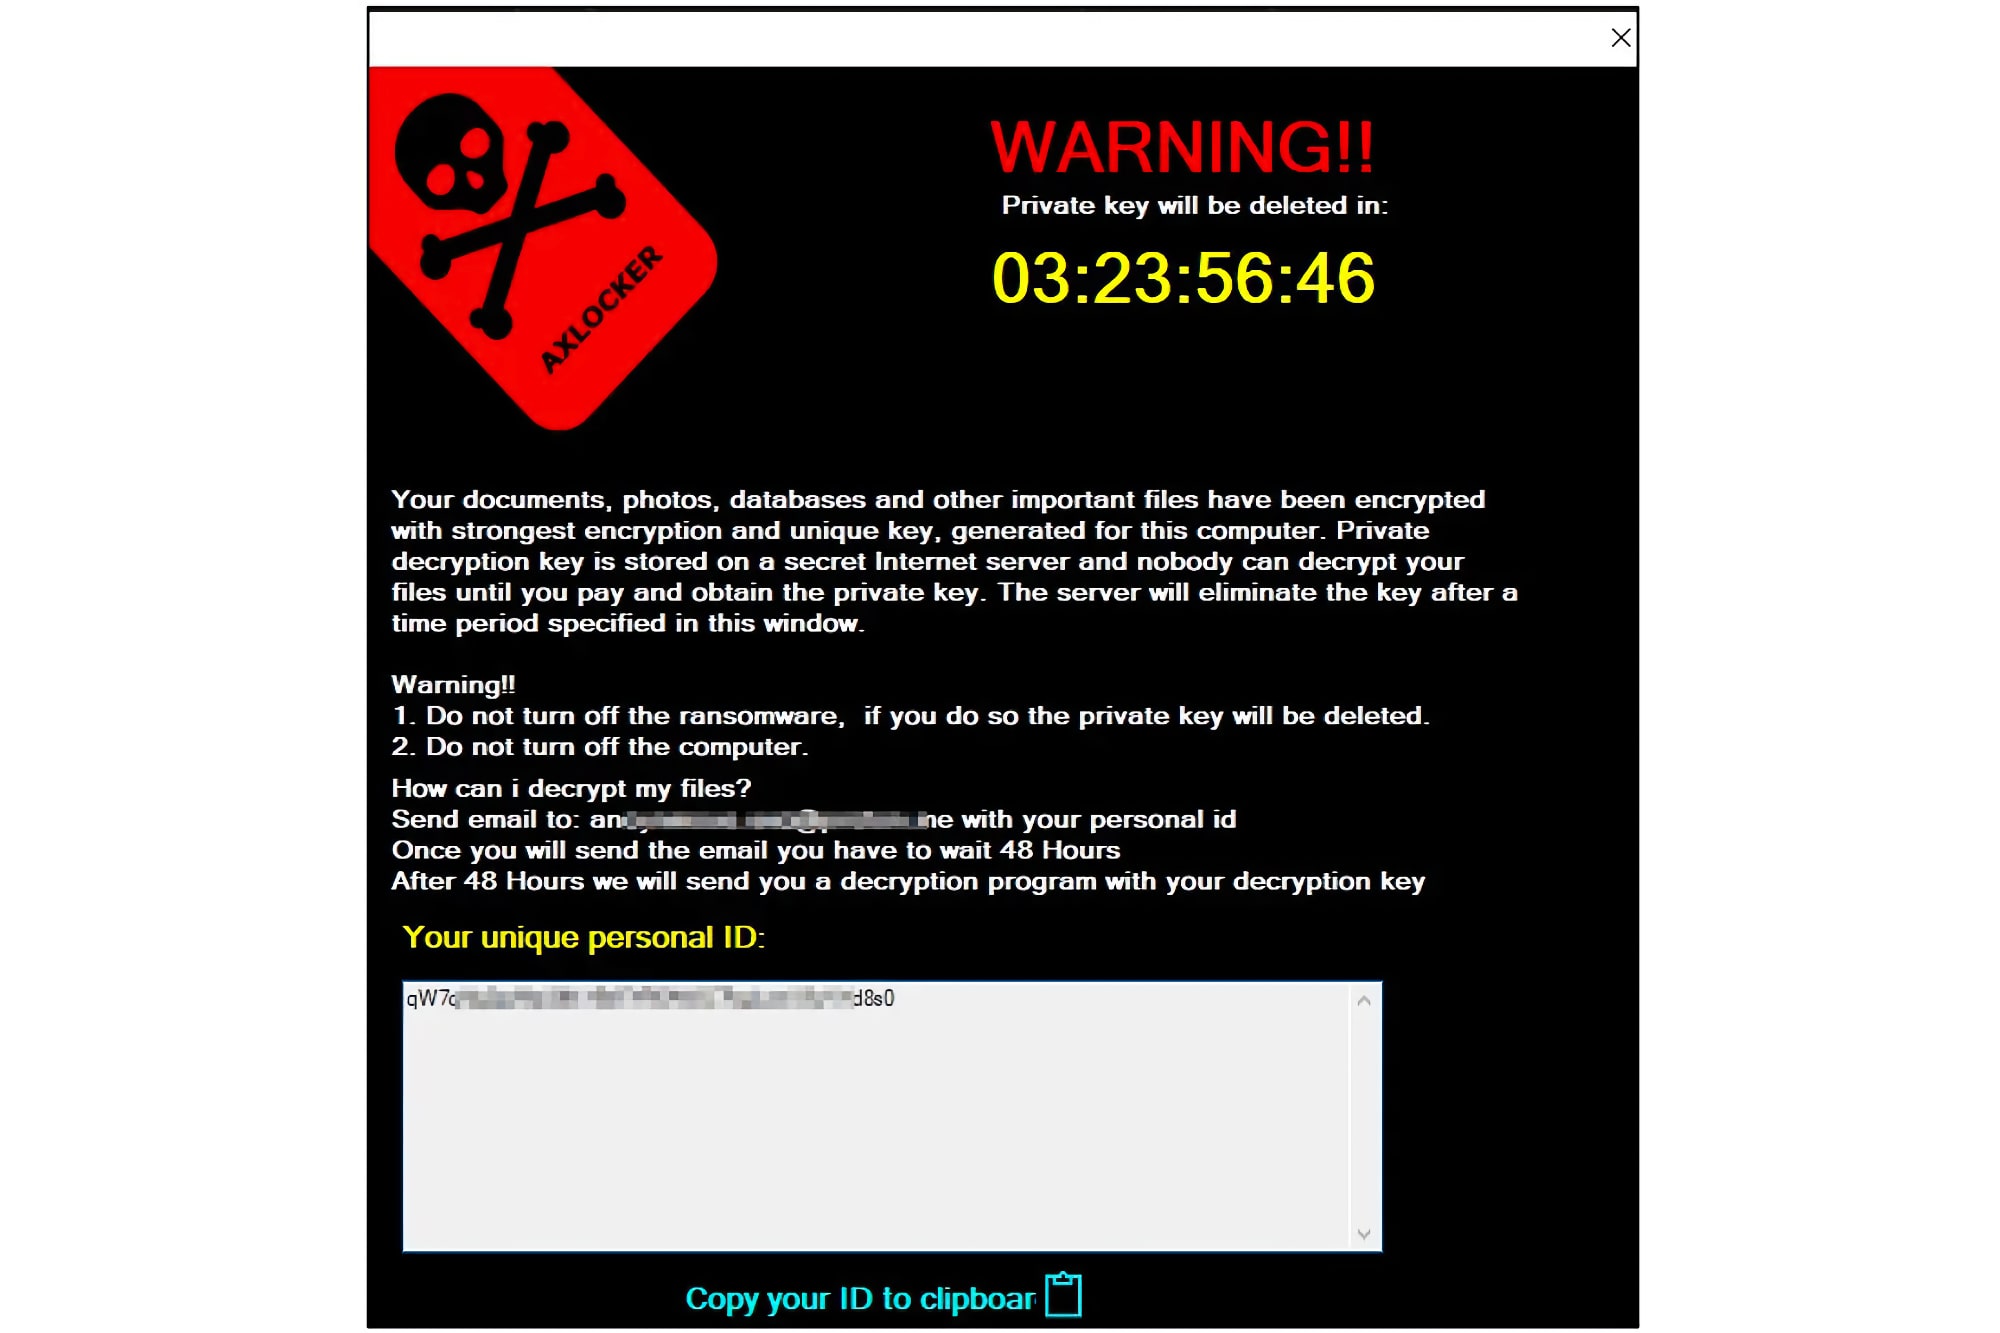 AXLocker ransomware doesn't change files' extensions